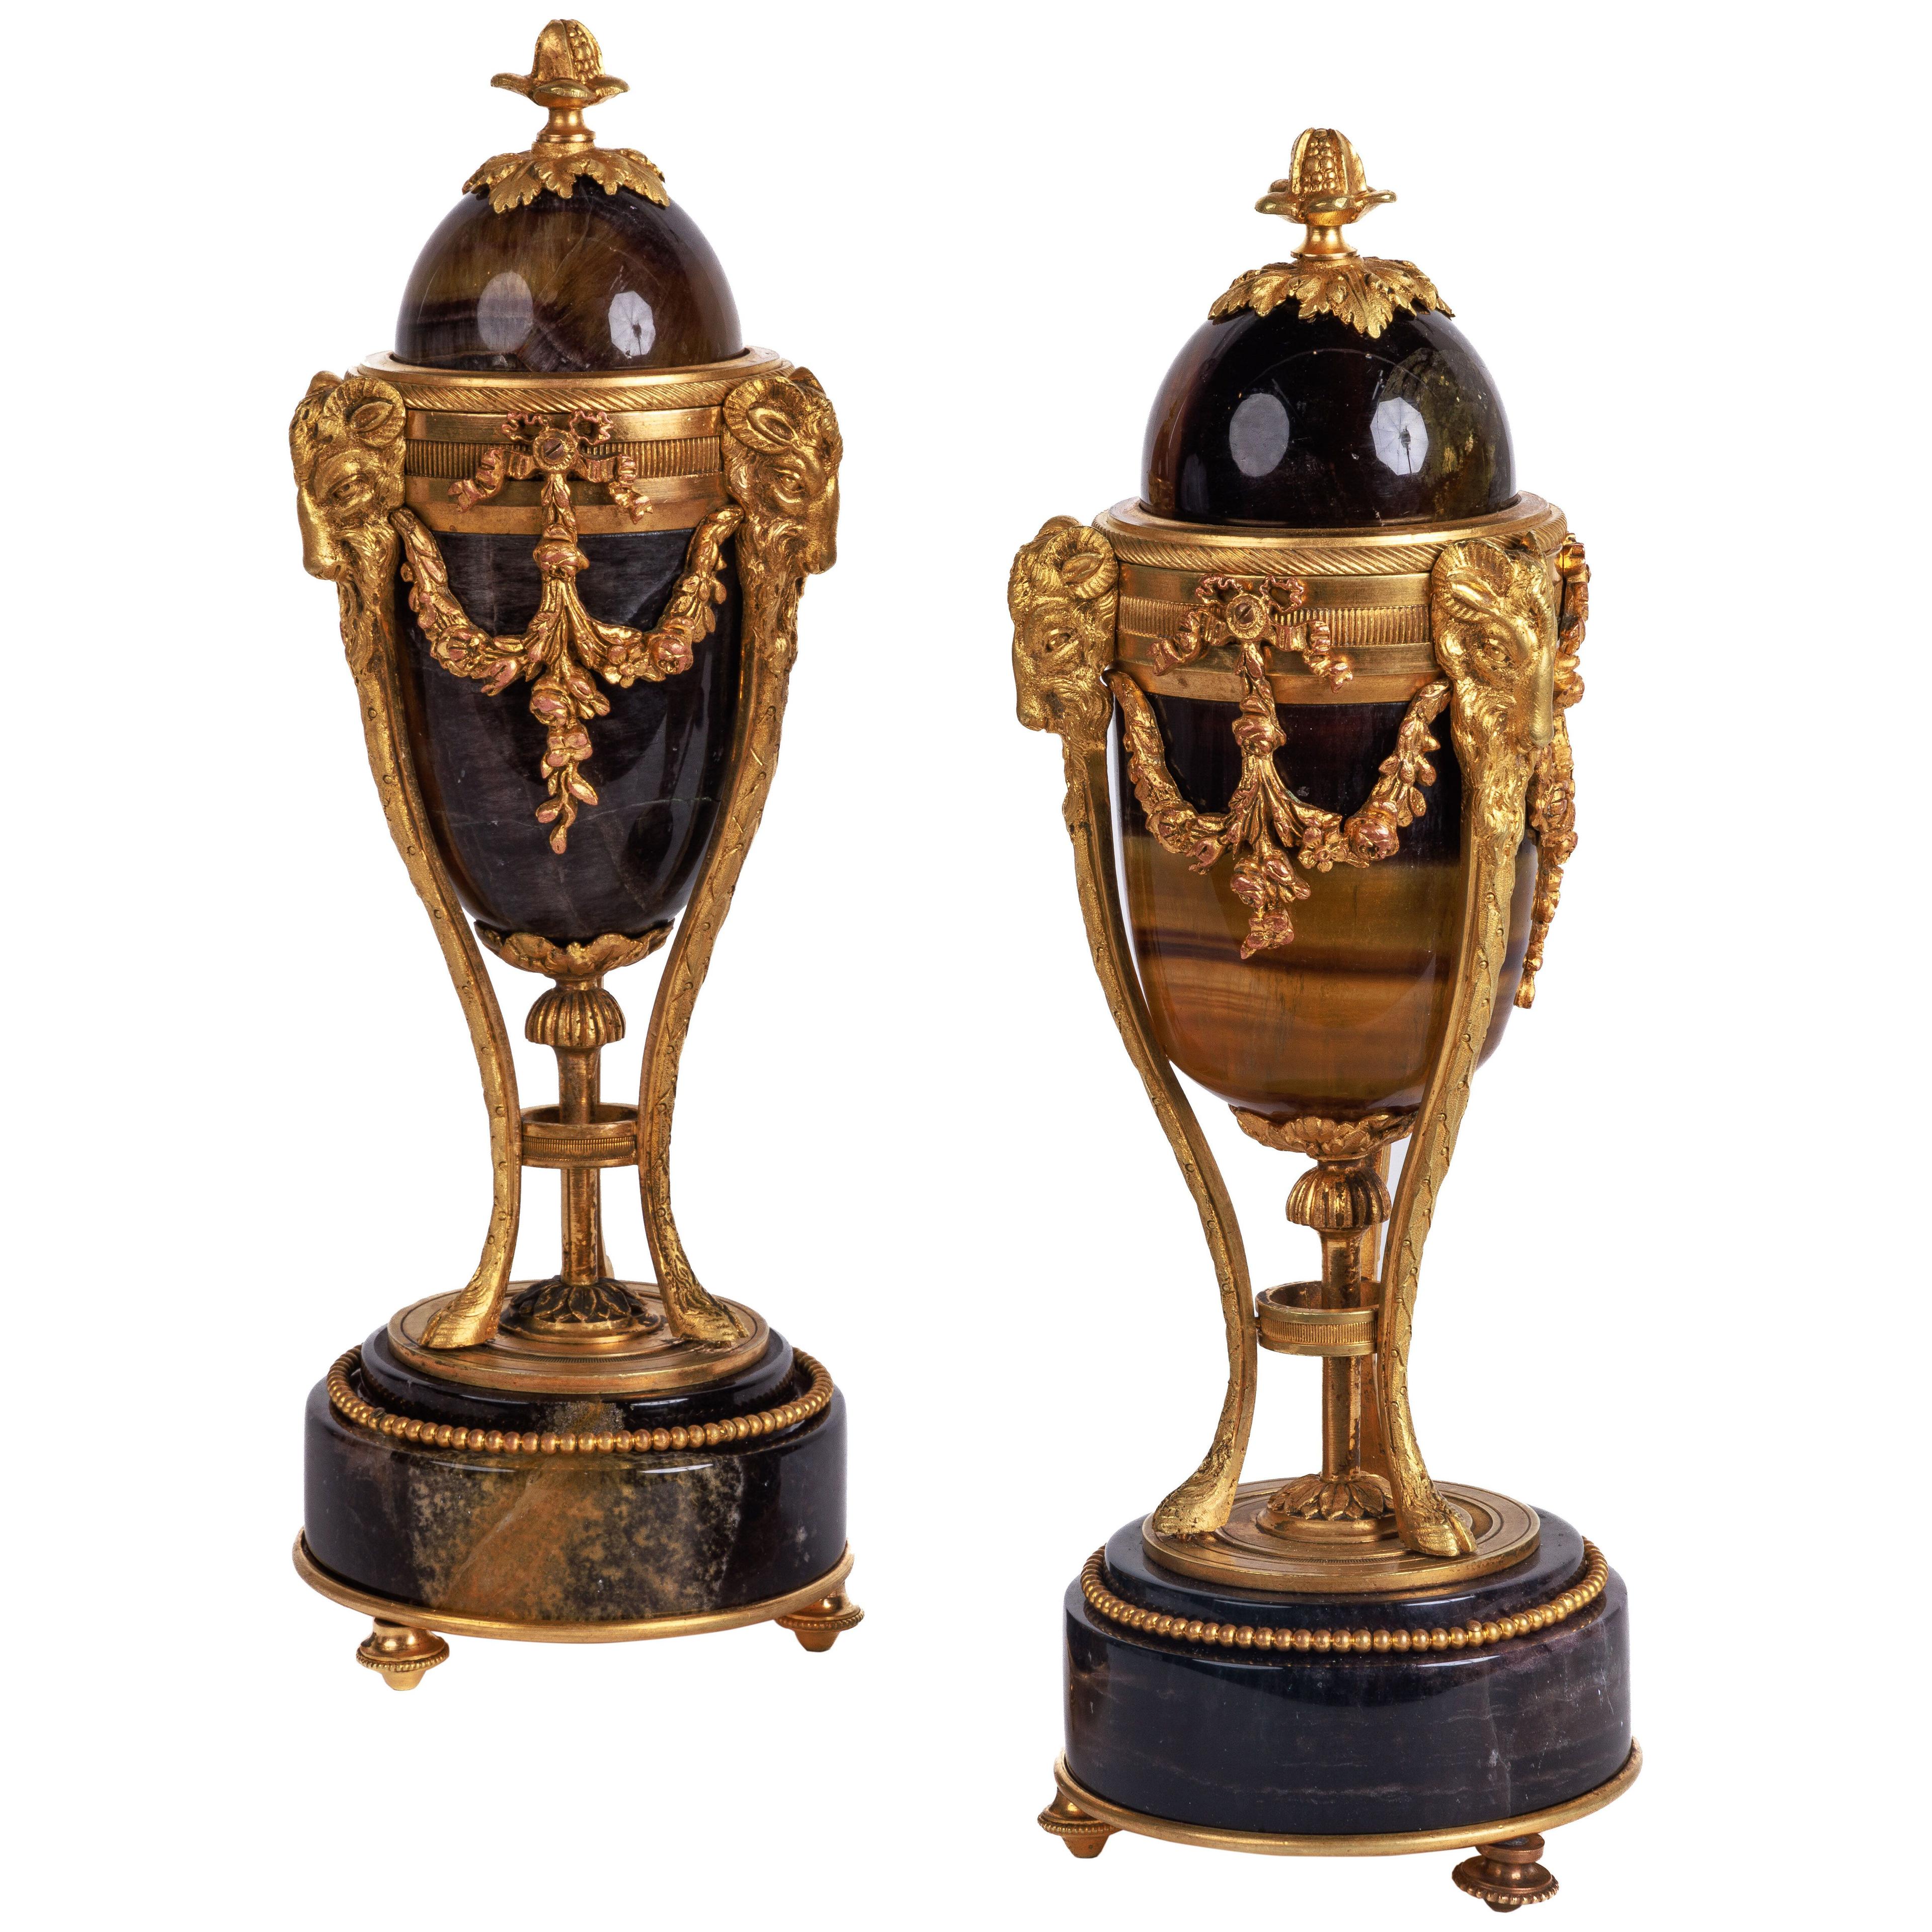 A Rare Pair of French Ormolu-Mounted Blue John Vases Candlesticks, C. 1870